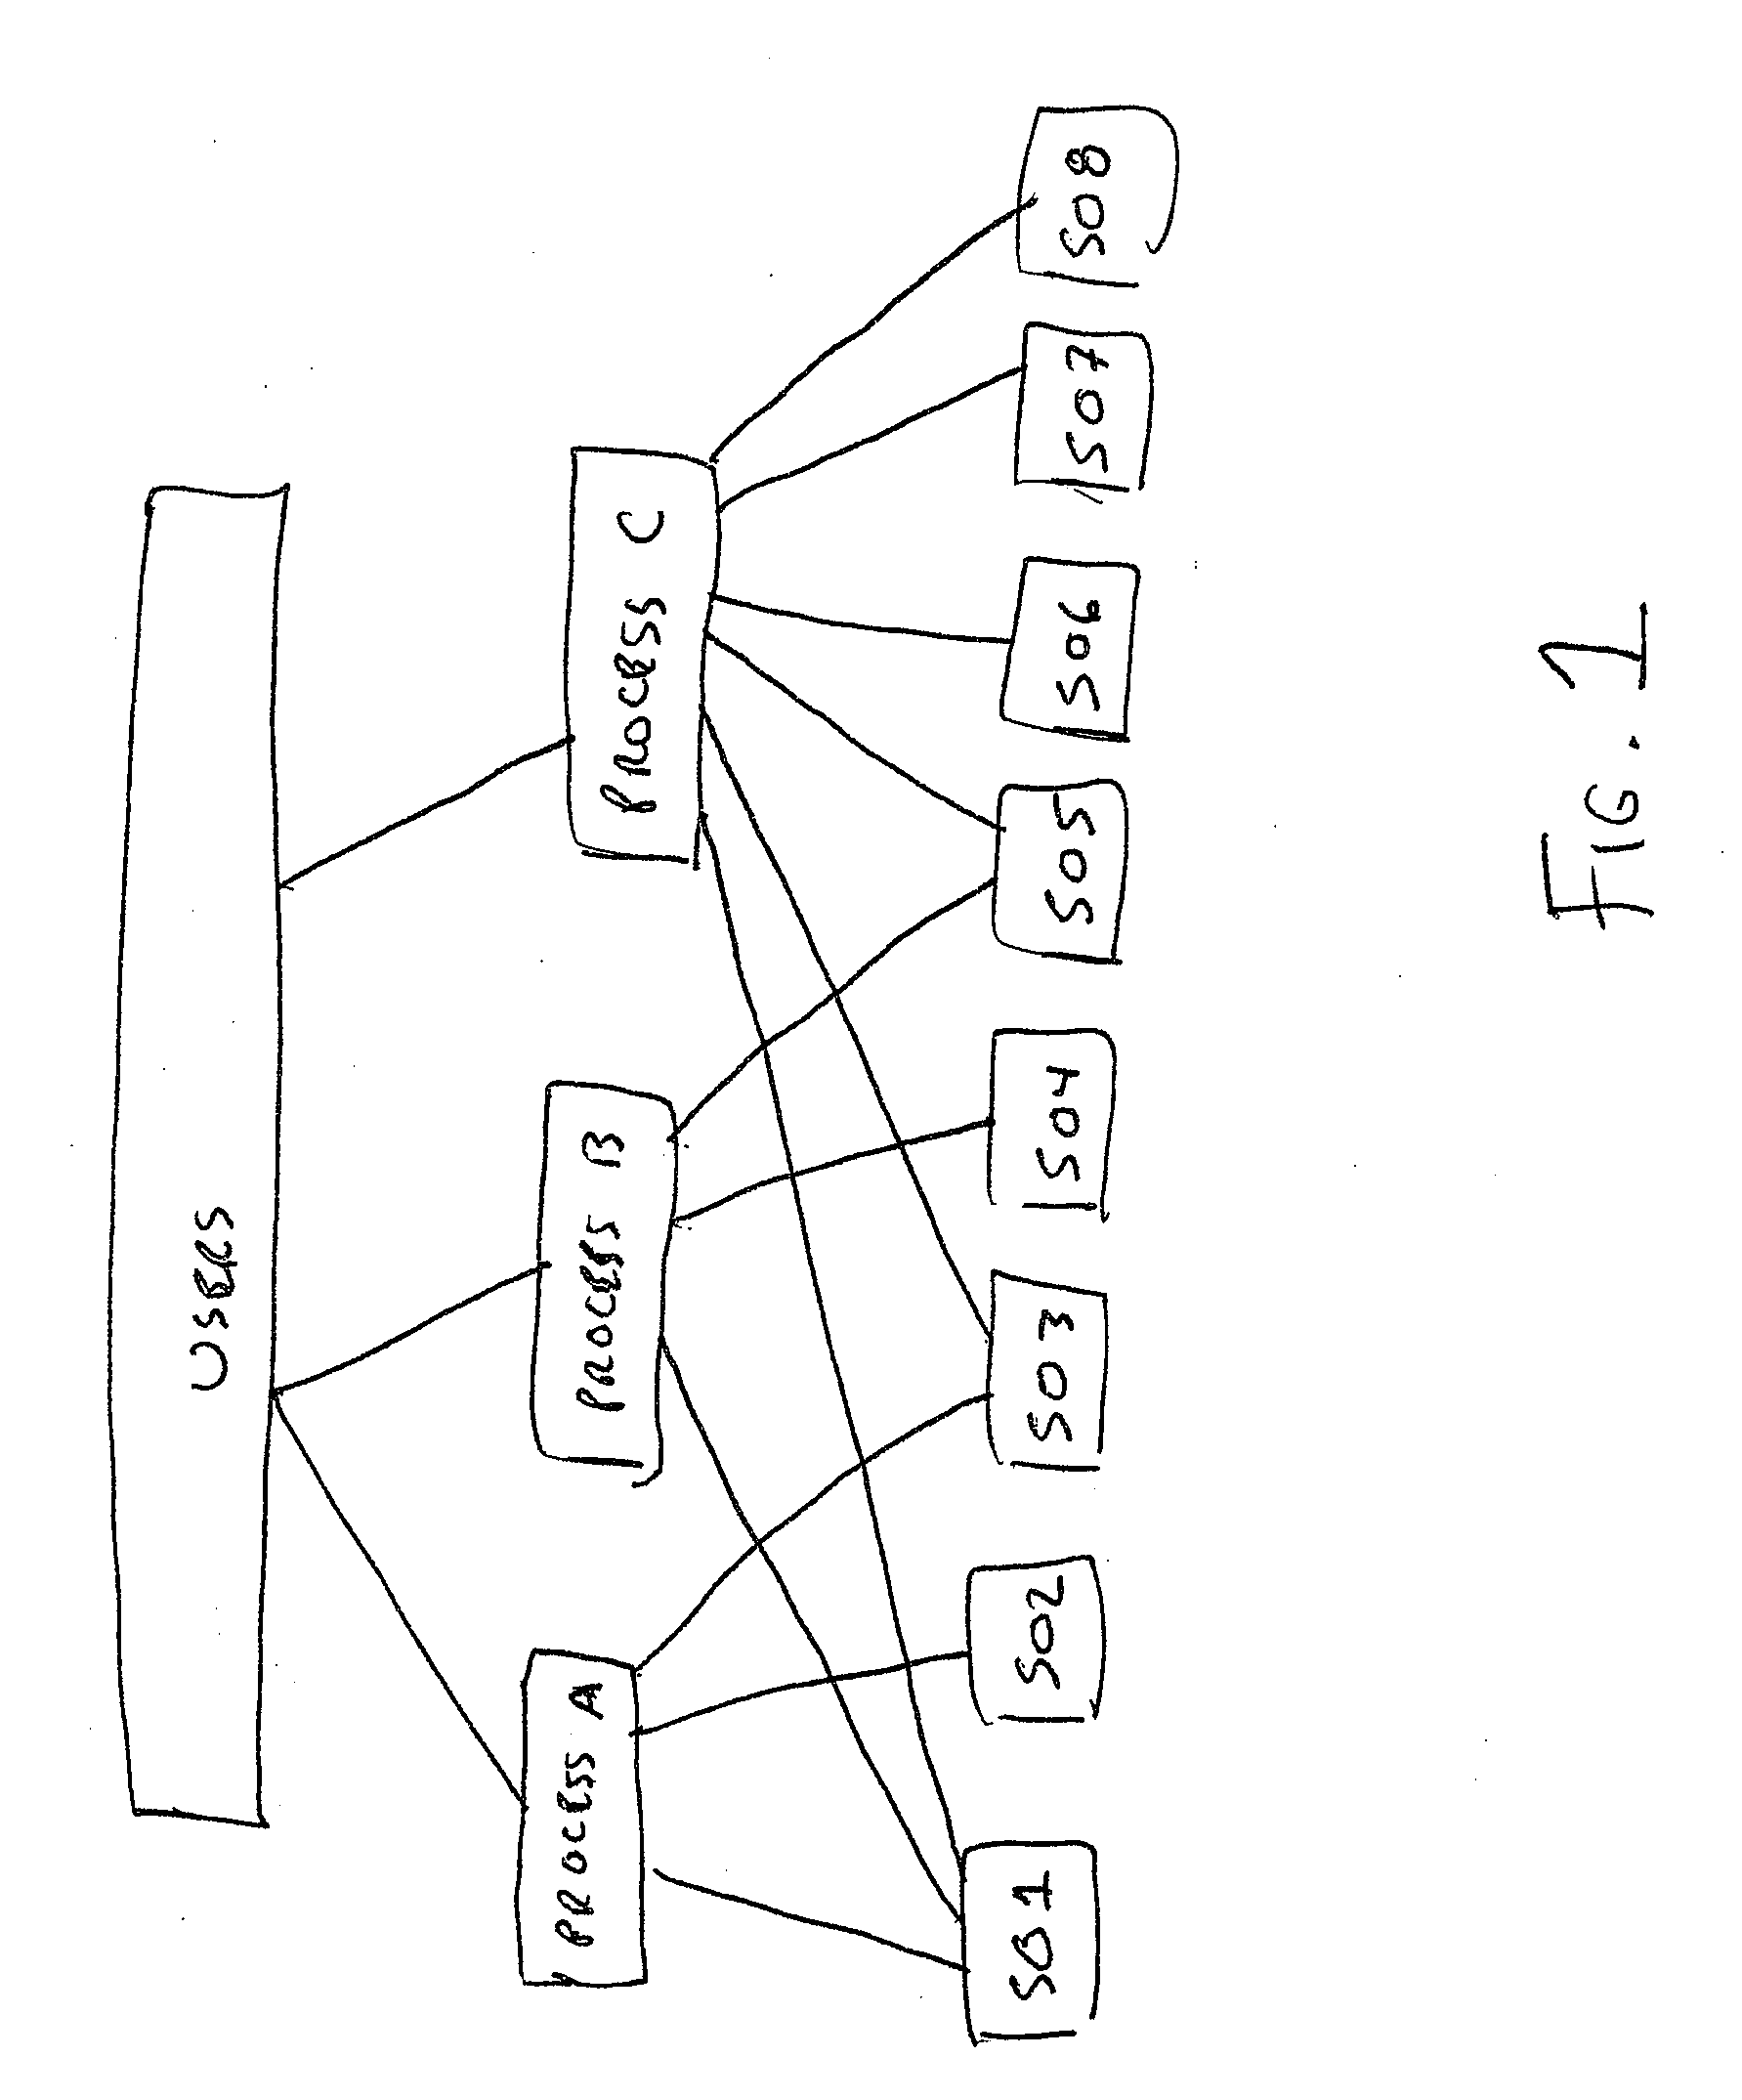 Network discovery system